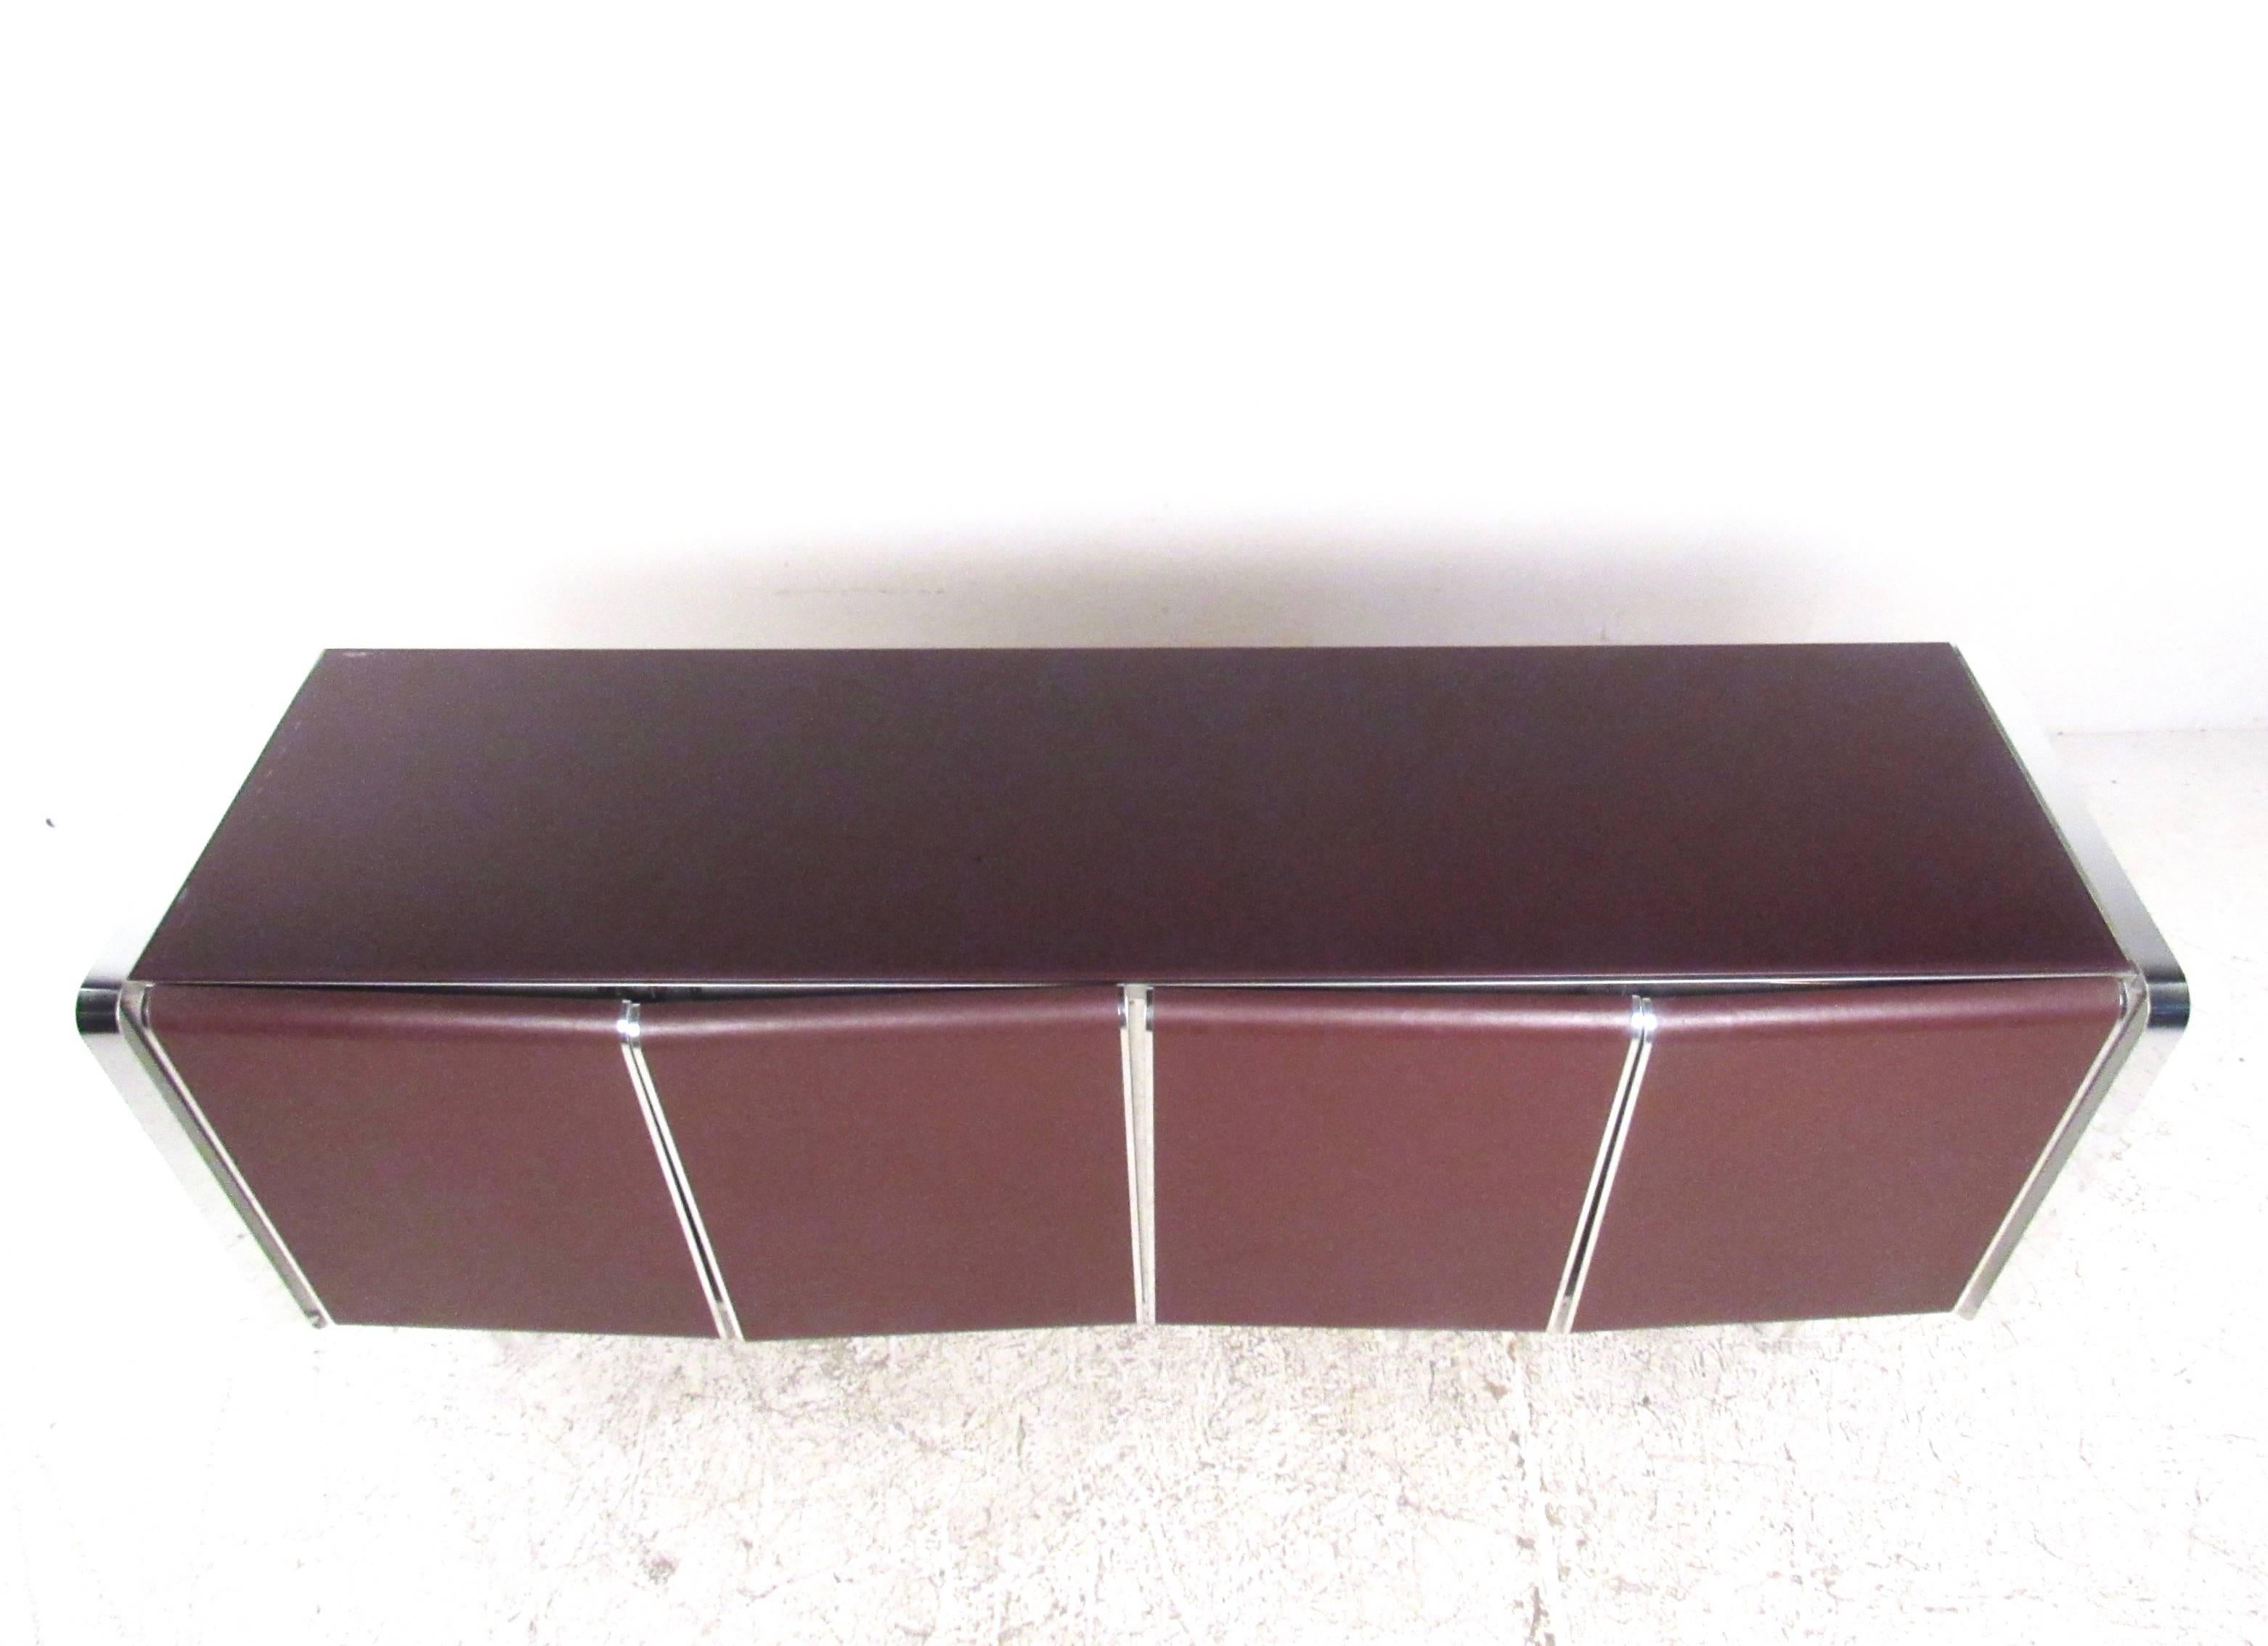 American Vintage Modern Chrome and Leatherette Front Italian Sideboard